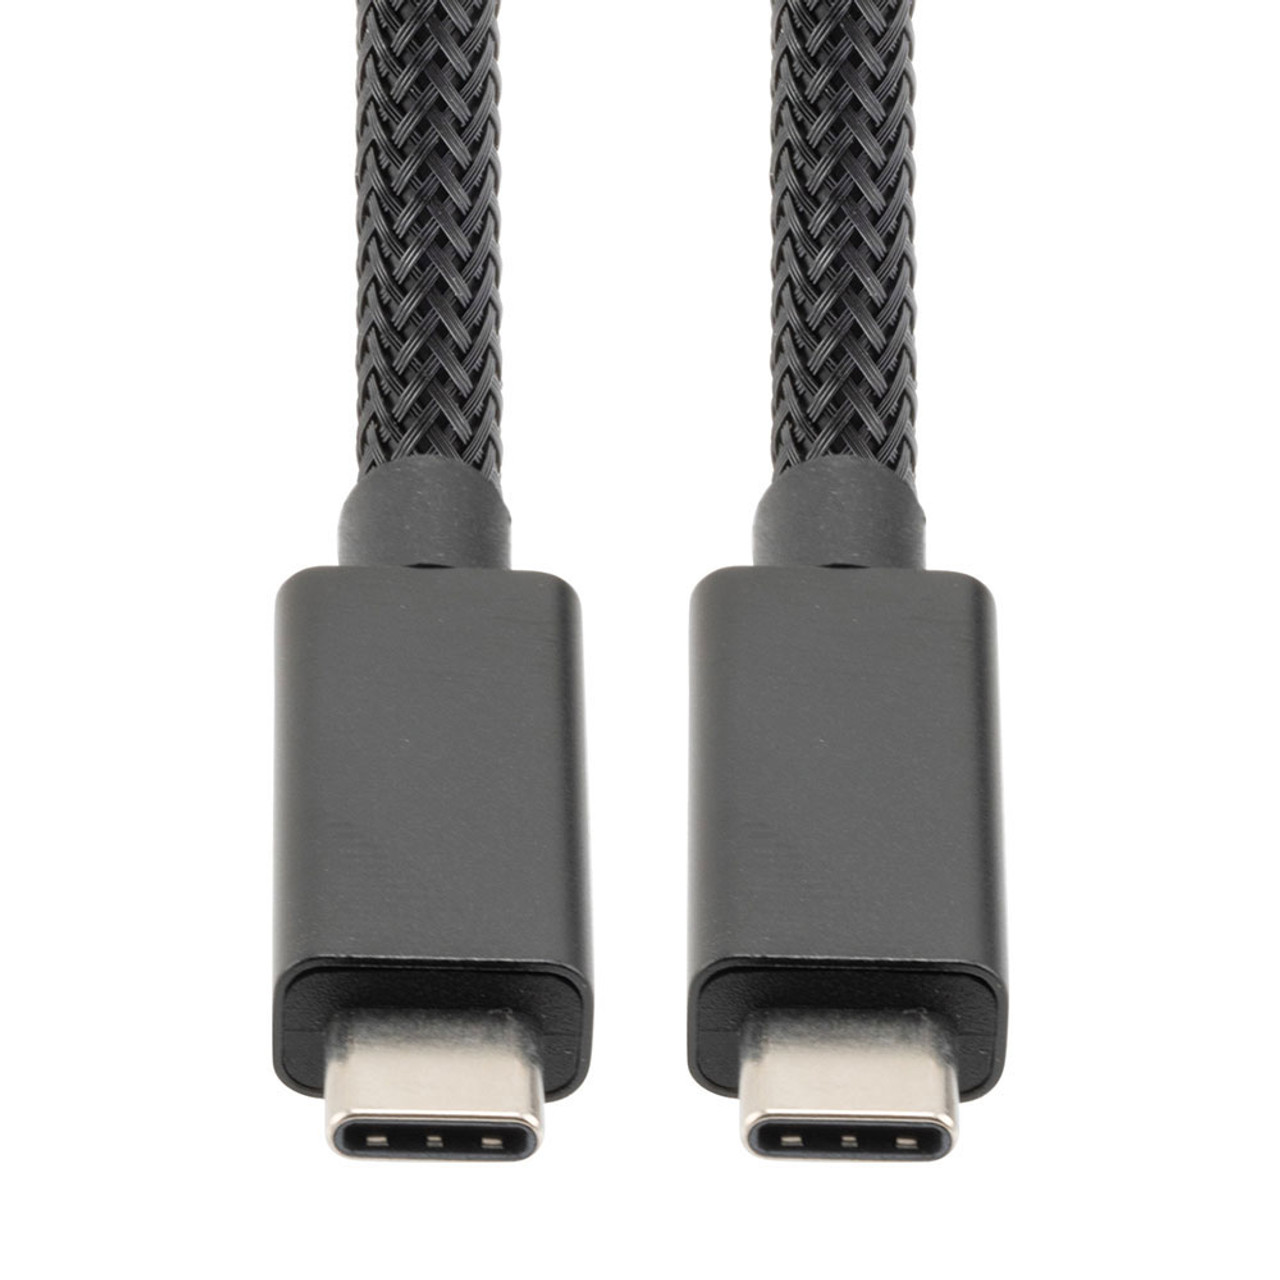 NavePoint USB C 3.1 Male to USB C 3.1 Male Cable, Aluminum Shell, Supports 20 Volts/5 Amps, 10 Gbps, Black Nylon Braid, 2M Length